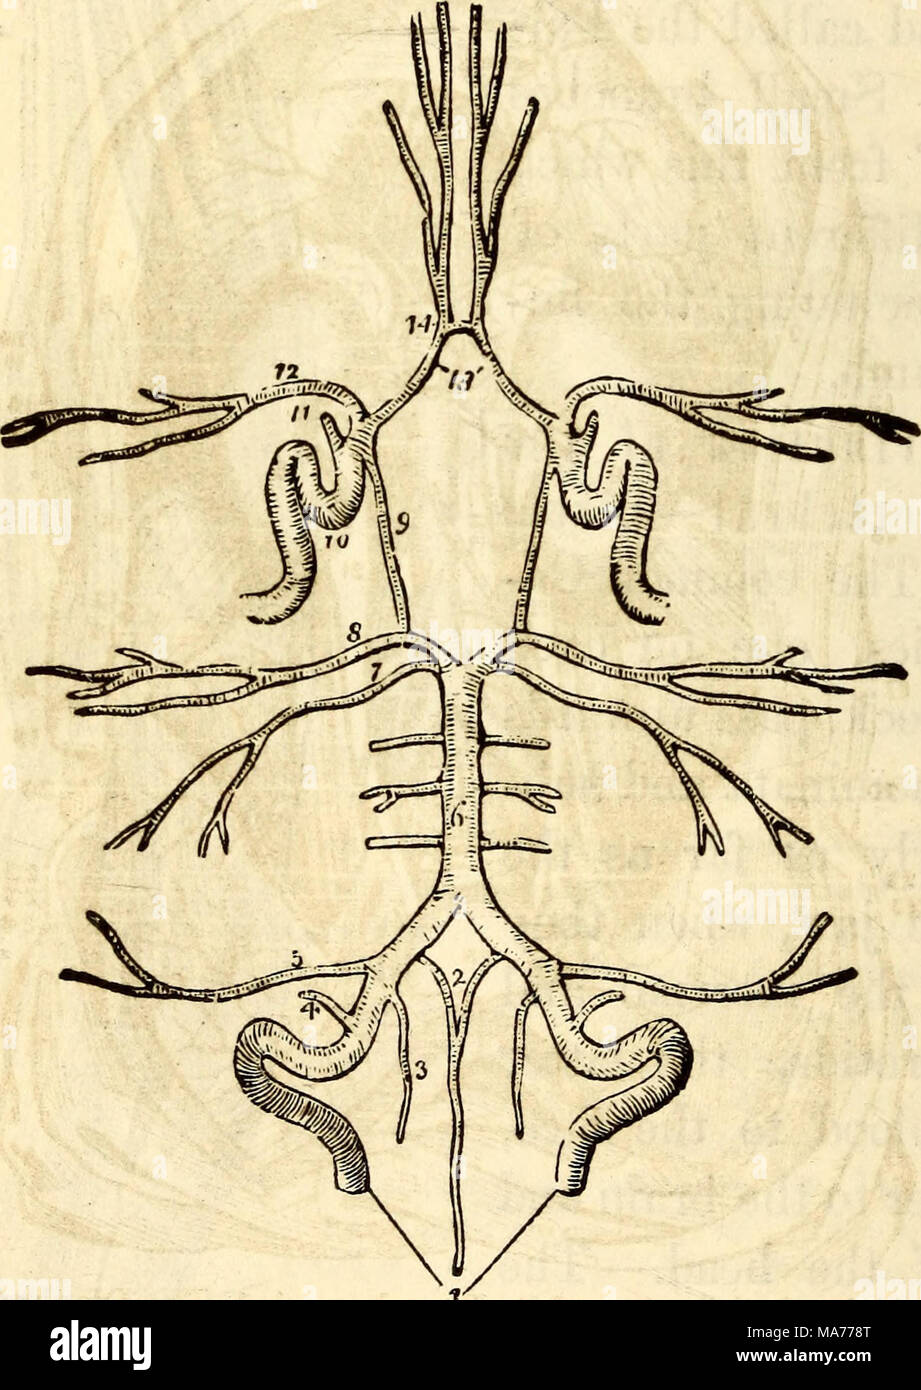 . Elementary anatomy and physiology : for colleges, academies, and other schools . Circle of Willis. 1, Vertebral Arteries. 2, 3, Anterior and Posterior Spinal Arteries. 4, Posterior Meningeal Artery. 5, Inferior Cerebellar. 6, Basilar. 7, Superior Cerebel- lar. 8, Posterior Cerebral. 9, Branch of Carotid. 10, Internal Carotid. 11, Ophthalmia Artery. 12,13, Cerebral Arteries. 14, Anterior Communicating Artery. entirely cease if the brain be deprived of its arterial blood. This arrangement is called the &quot; Circle of Willis&quot; from its discoverer. What arteries does the Vertebral communic Stock Photo